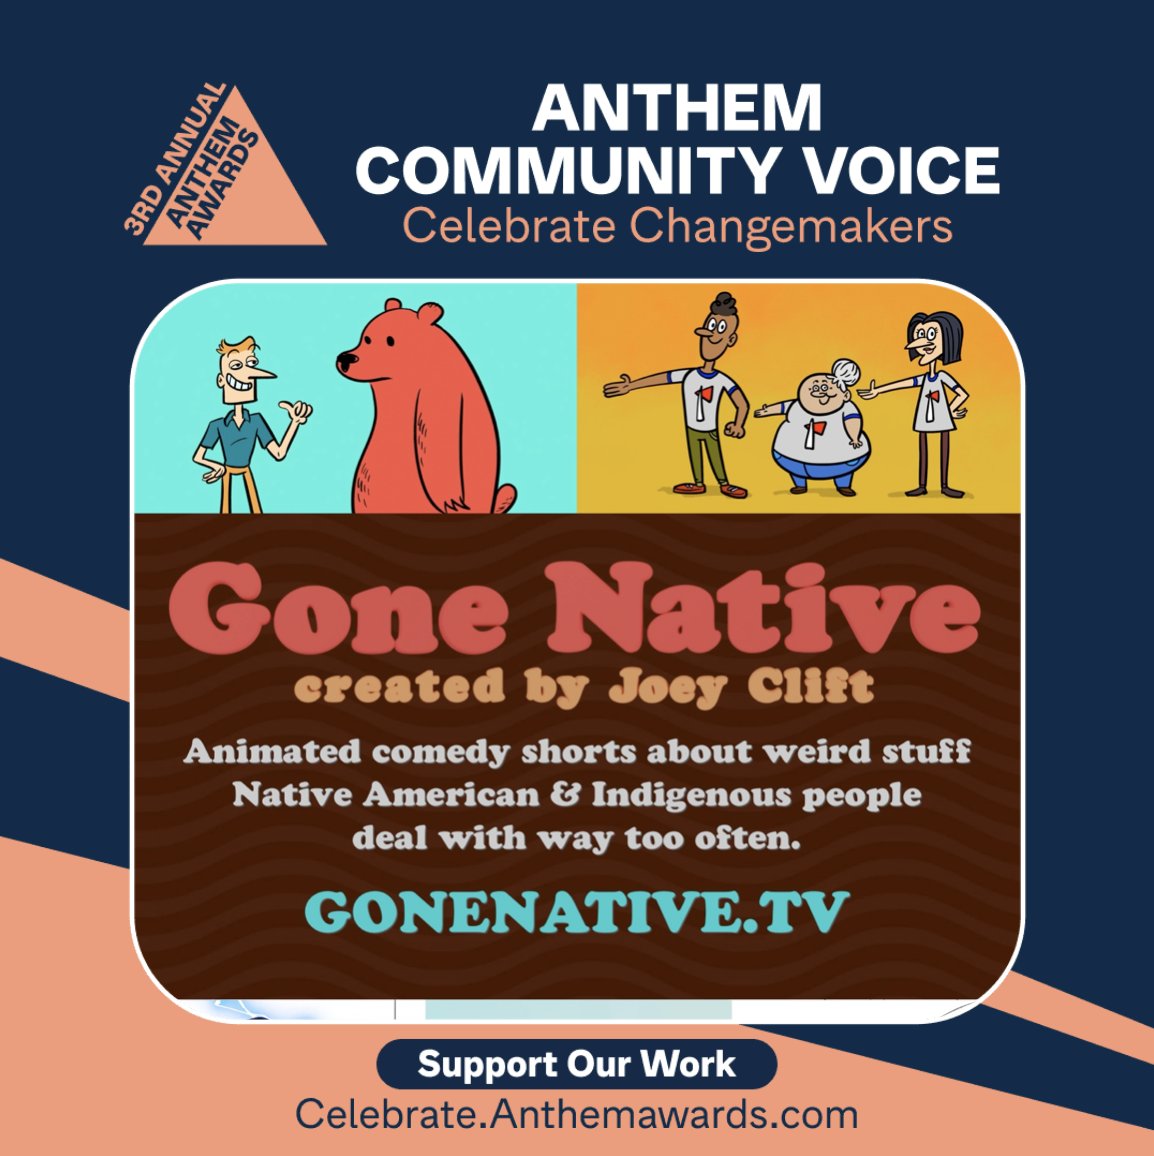 Hey Friends!
If you have a sec and want to help me out, Gone Native is nominated for a Community Voice award for the @anthemawards. It's an audience award and winning stuff like this helps me get funding for more shorts! Please RT / vote if you can. 
Link to vote in the replies!